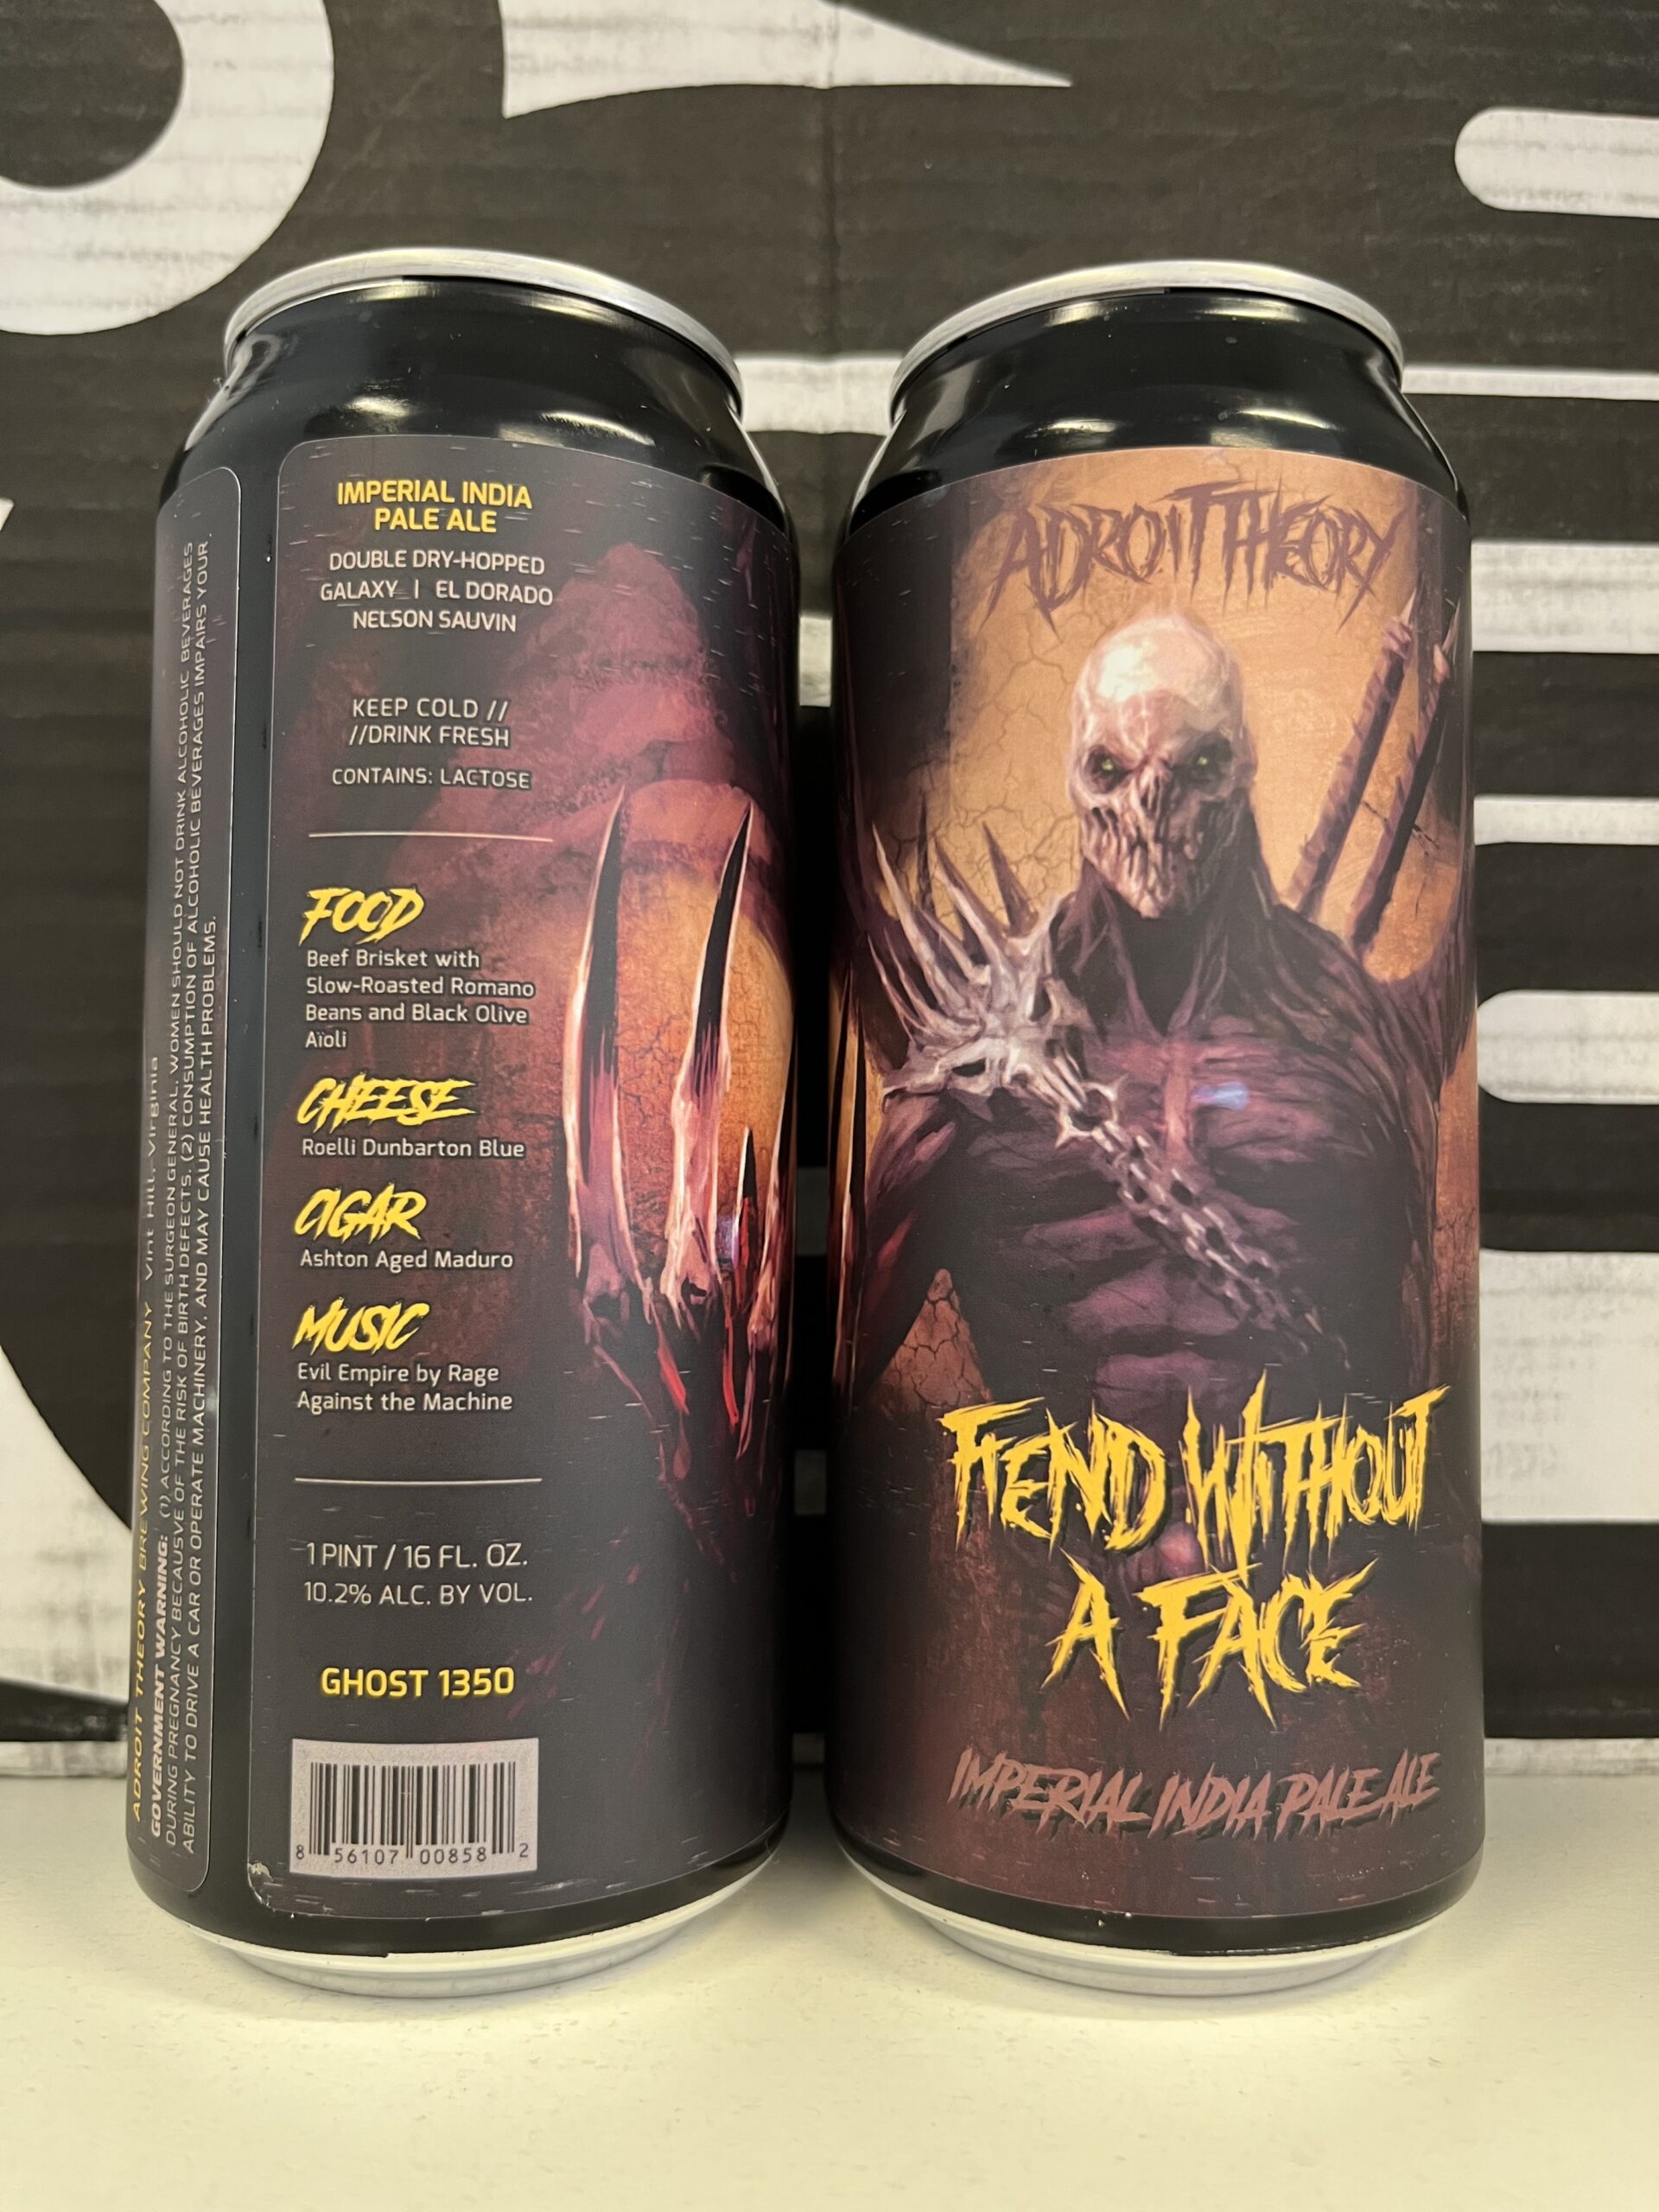 ADROIT THEORY BREWING - FRIEND WITHOUT A FACE